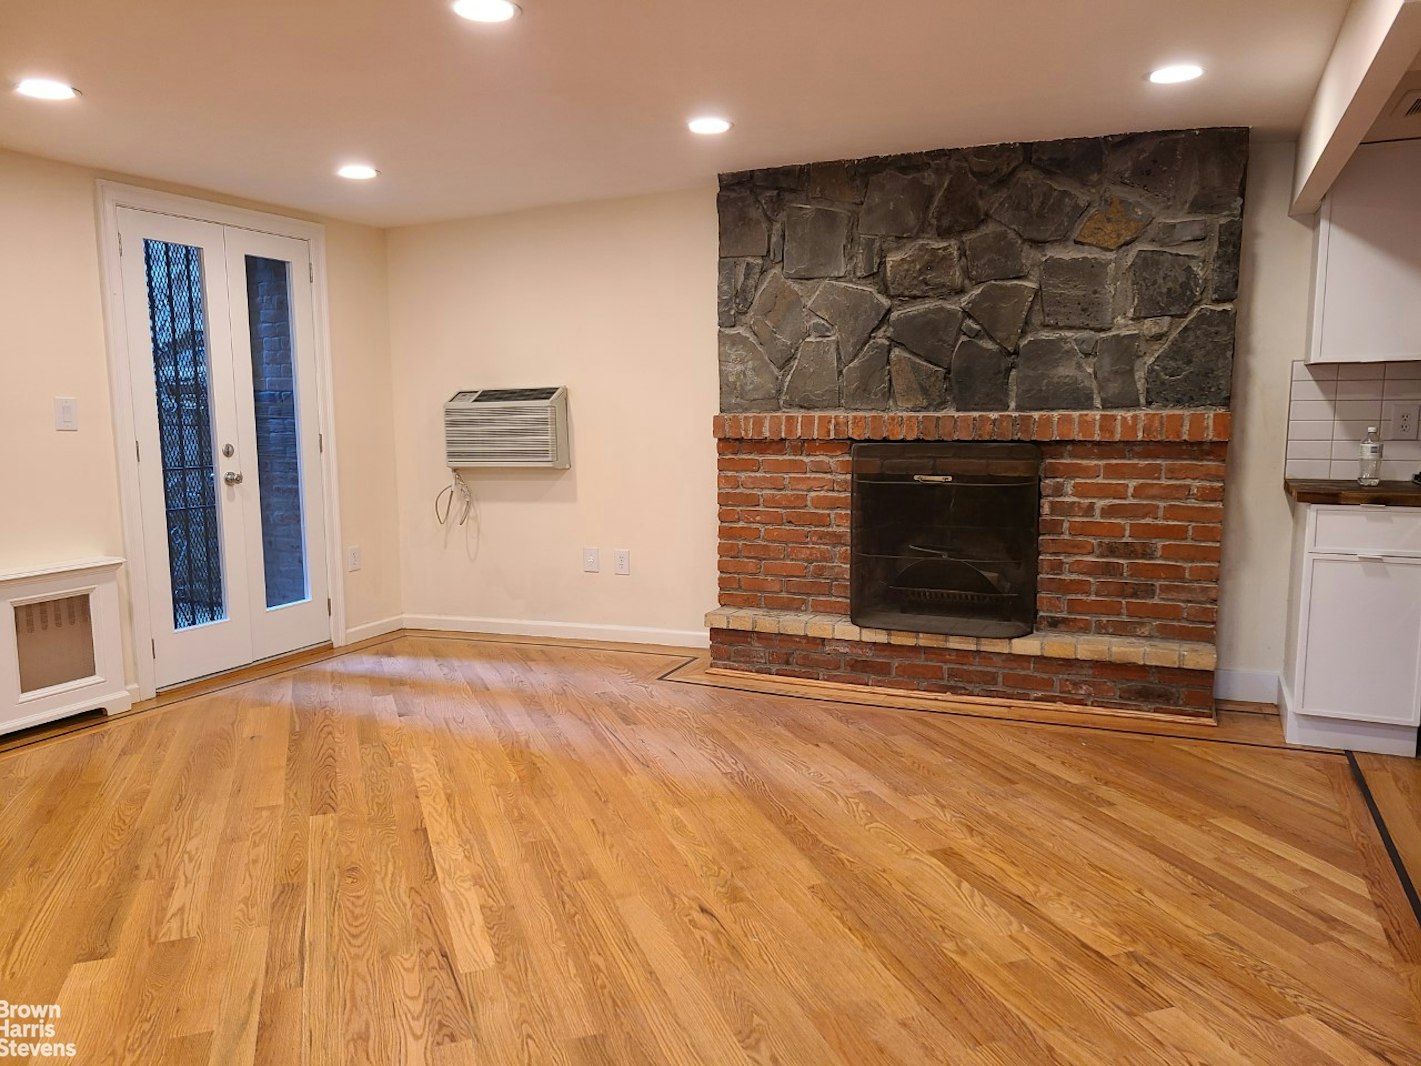 a view of an empty room with wooden floor and a fireplace